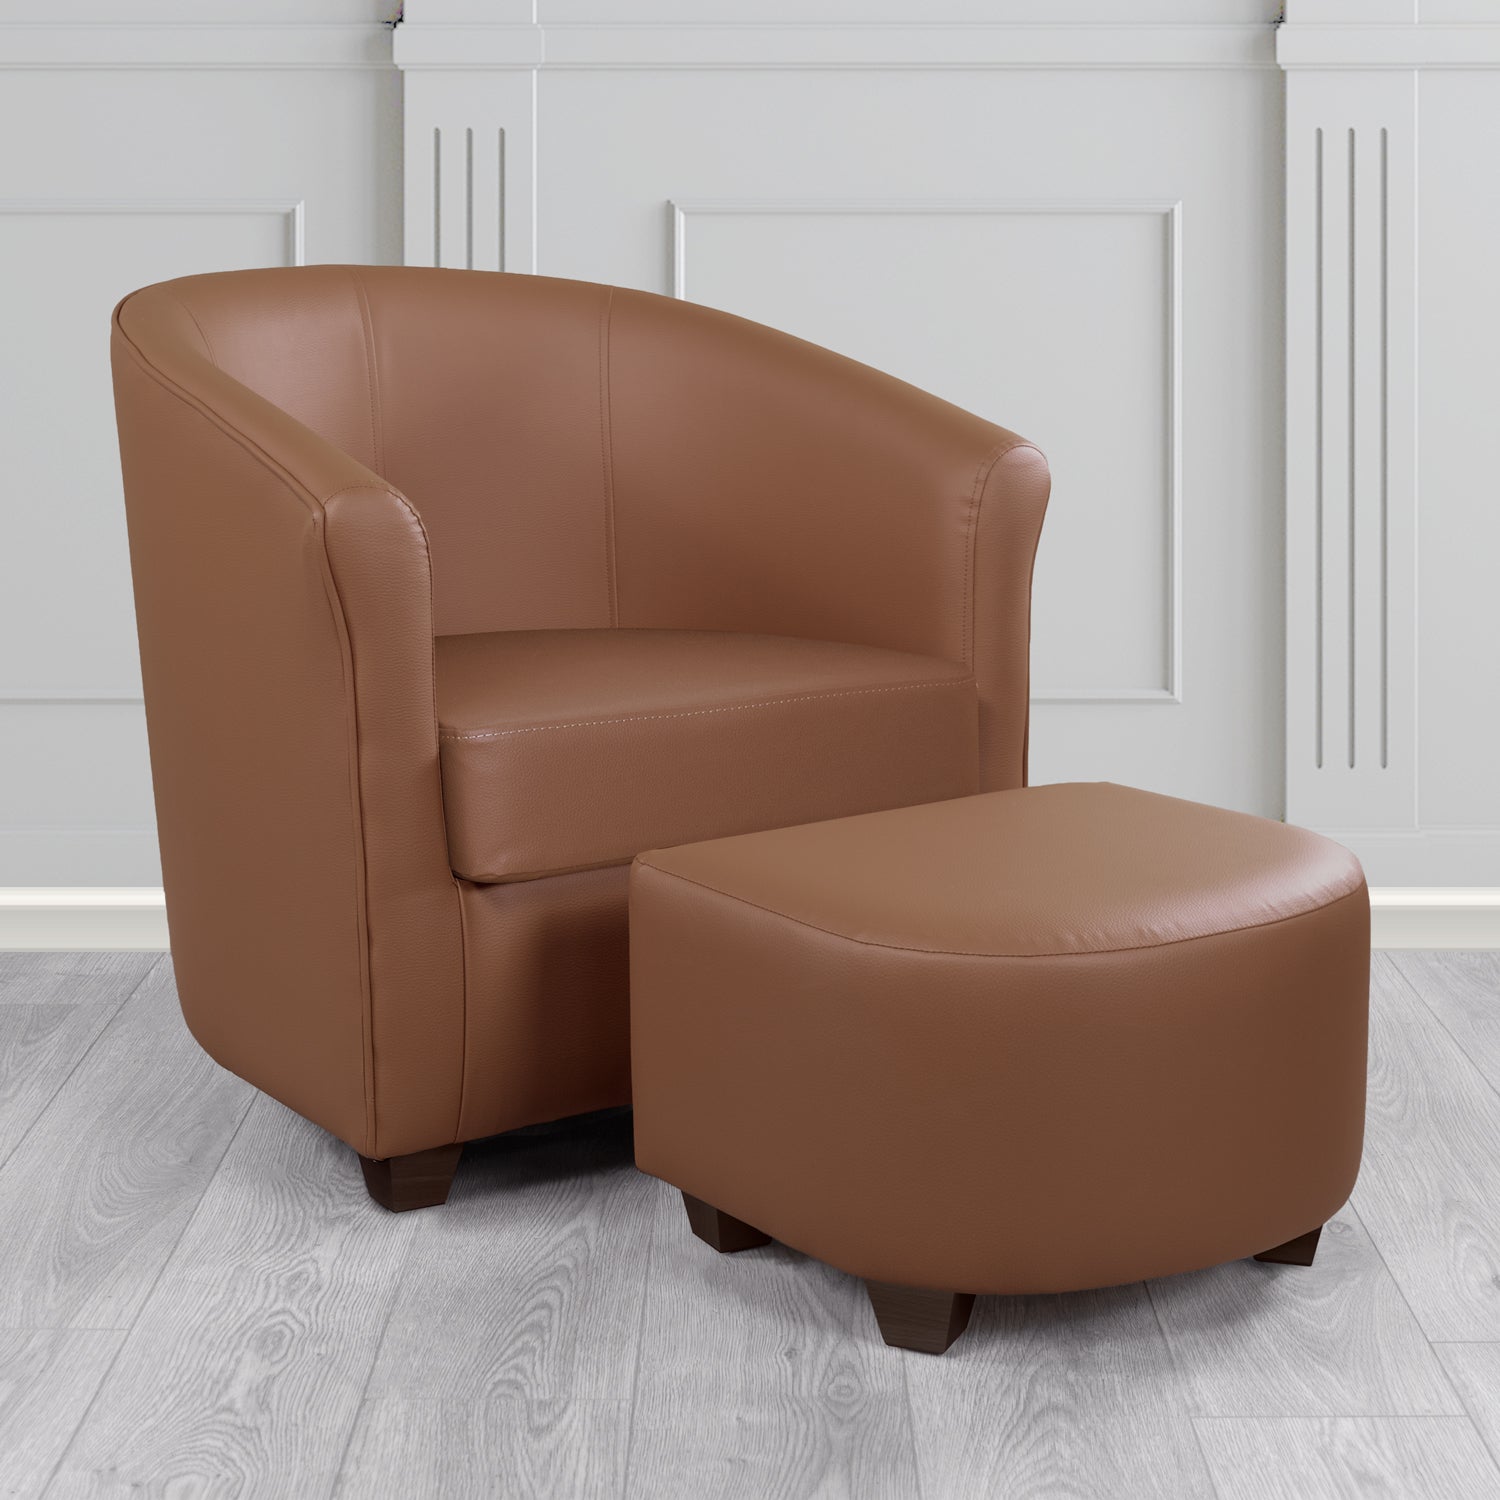 Cannes Tub Chair with Footstool Set in Just Colour Walnut Crib 5 Faux Leather